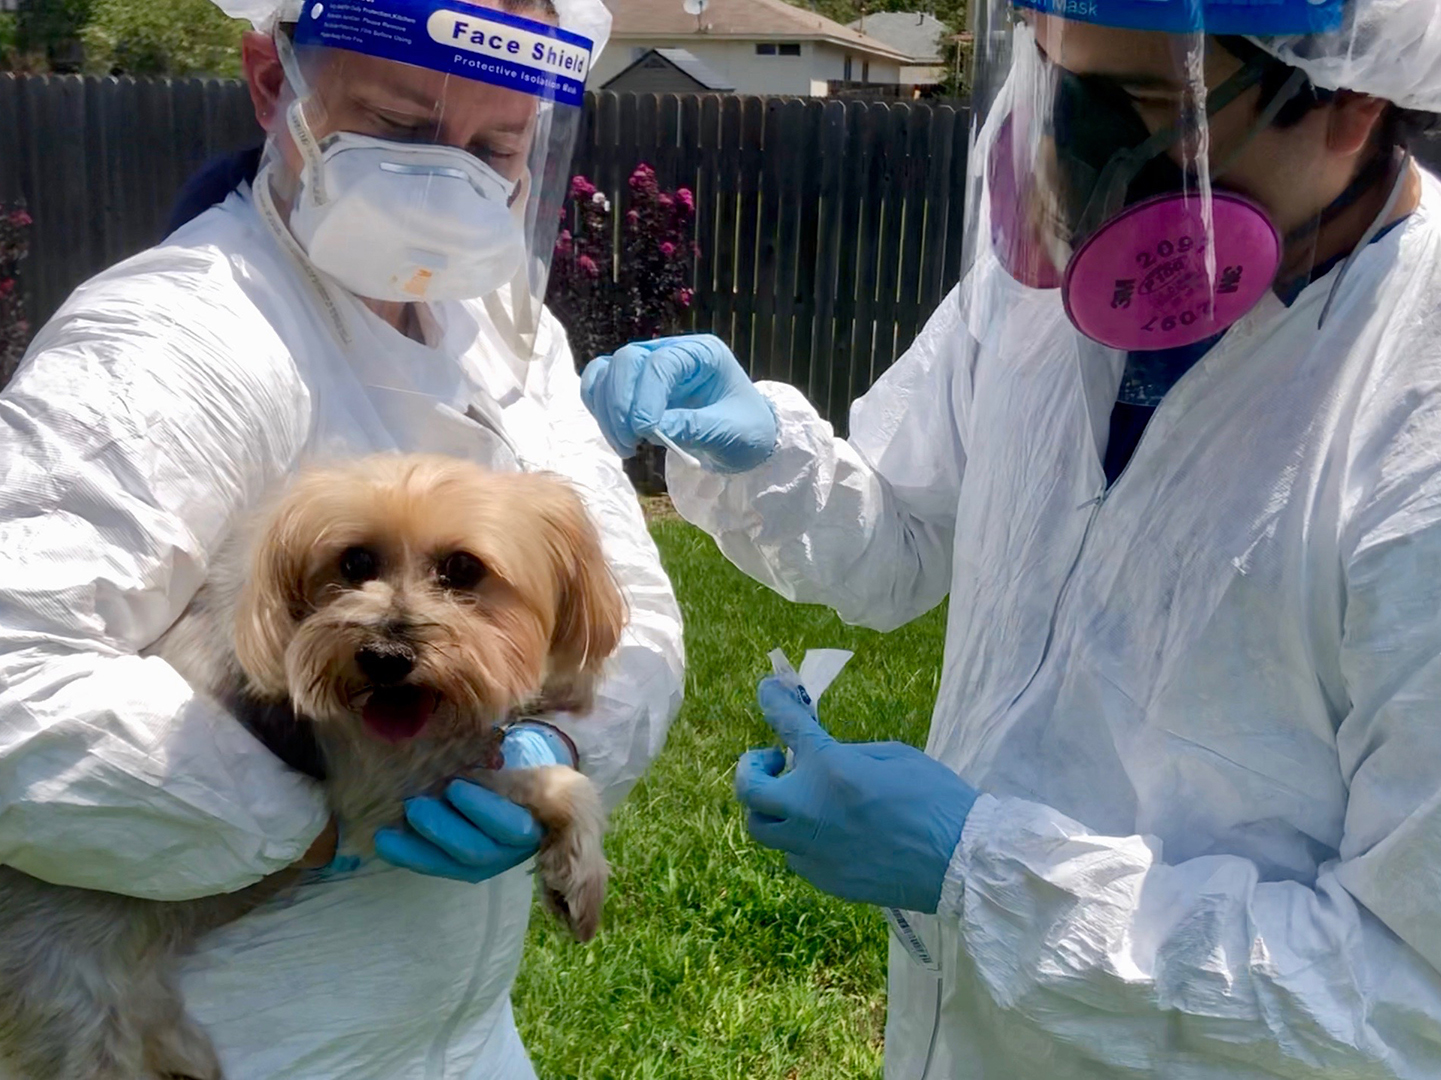 Two scientists in white lab coats and personal protective equipment swab a small yorkie dog